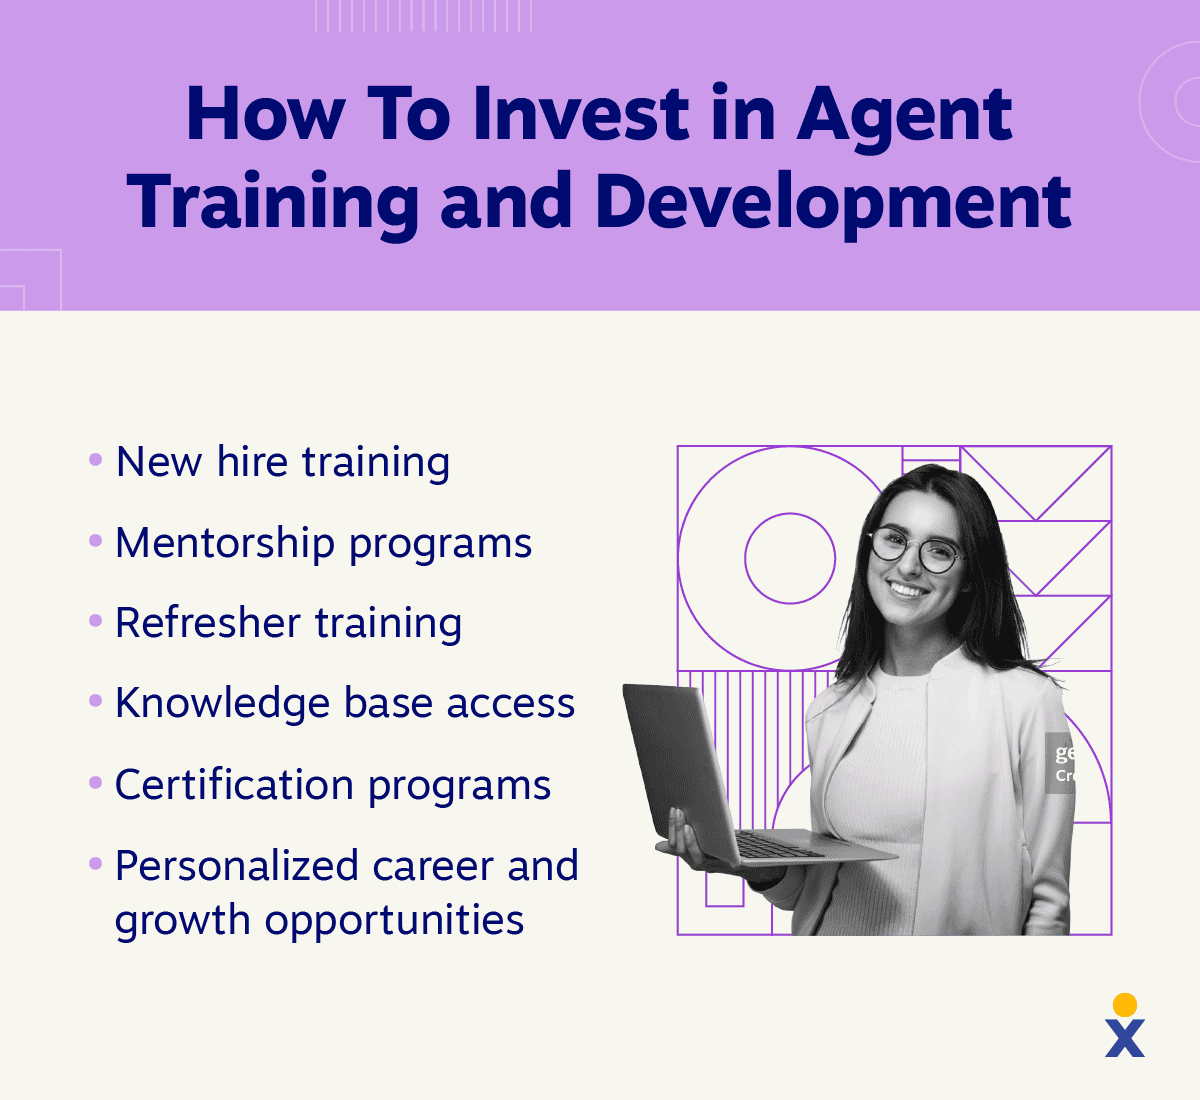 A list of how to invest in agent training, development, and upskilling.